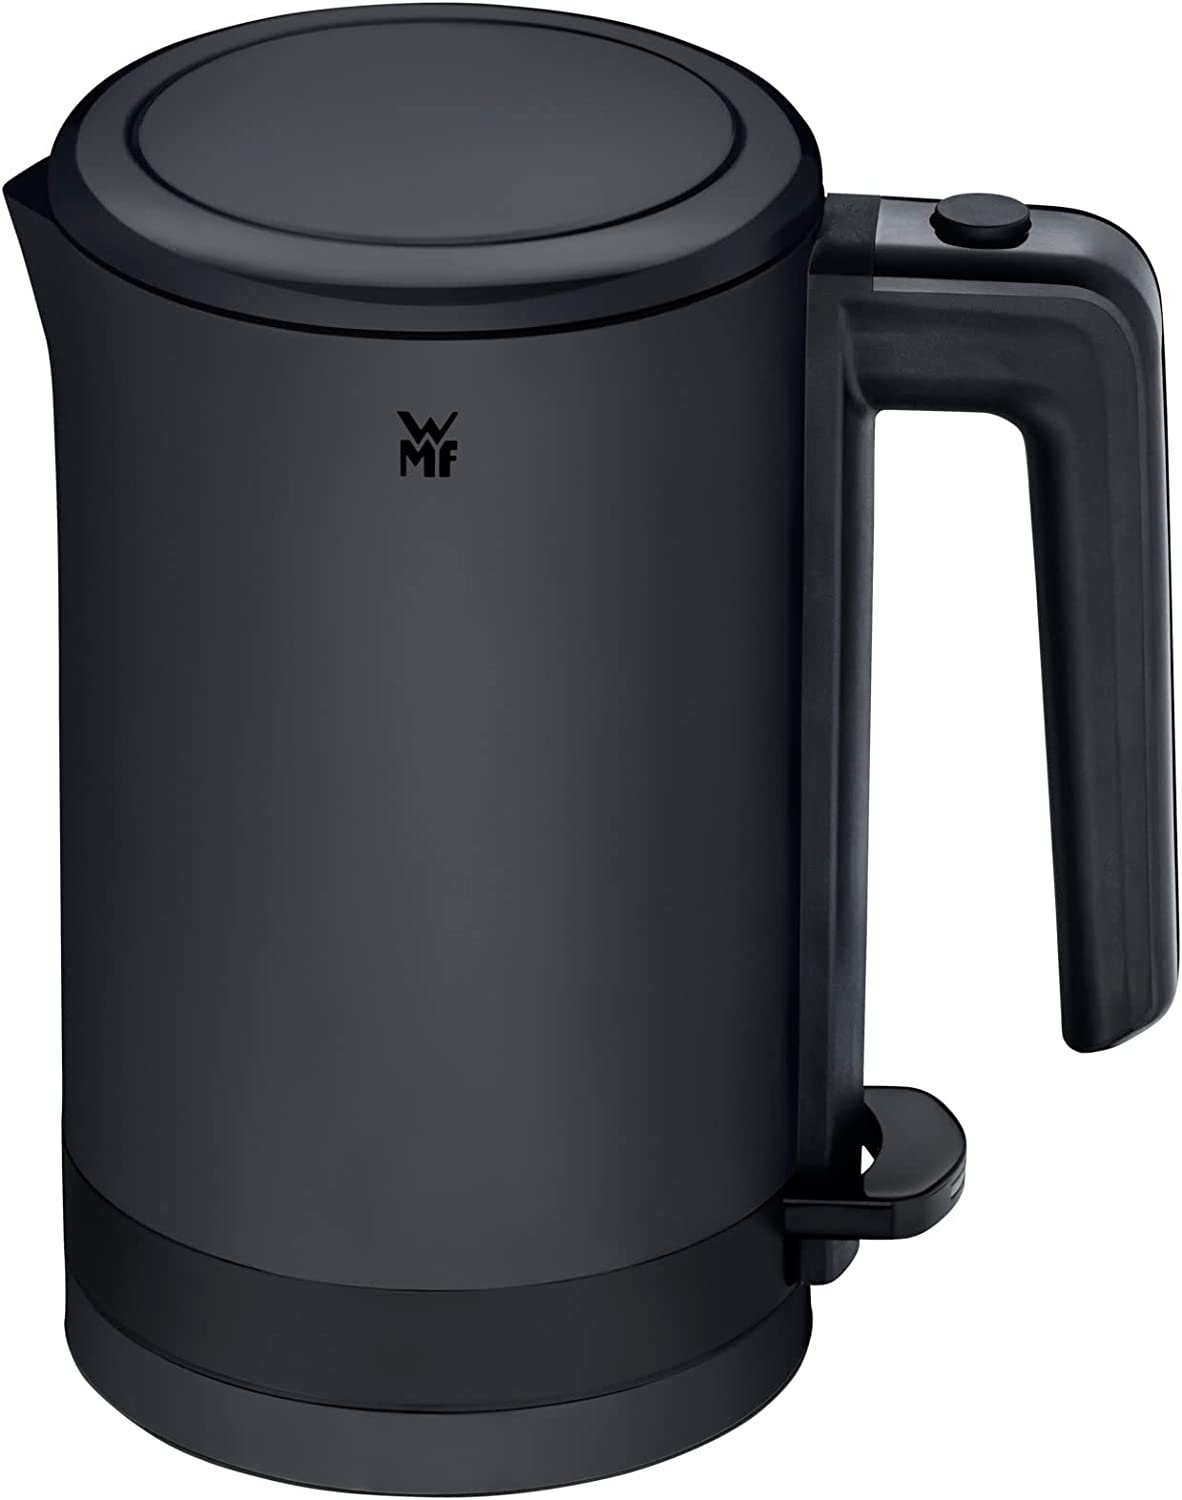 WMF Küchenminis Kettle 0.8 Litres, Deep Black Design, 1.800 Watt, Concealed Stainless Steel Heating Element, one-Handed Opening, Automatic Cooking Shut-Off, Water Level Indicator, Stainless Steel Housing